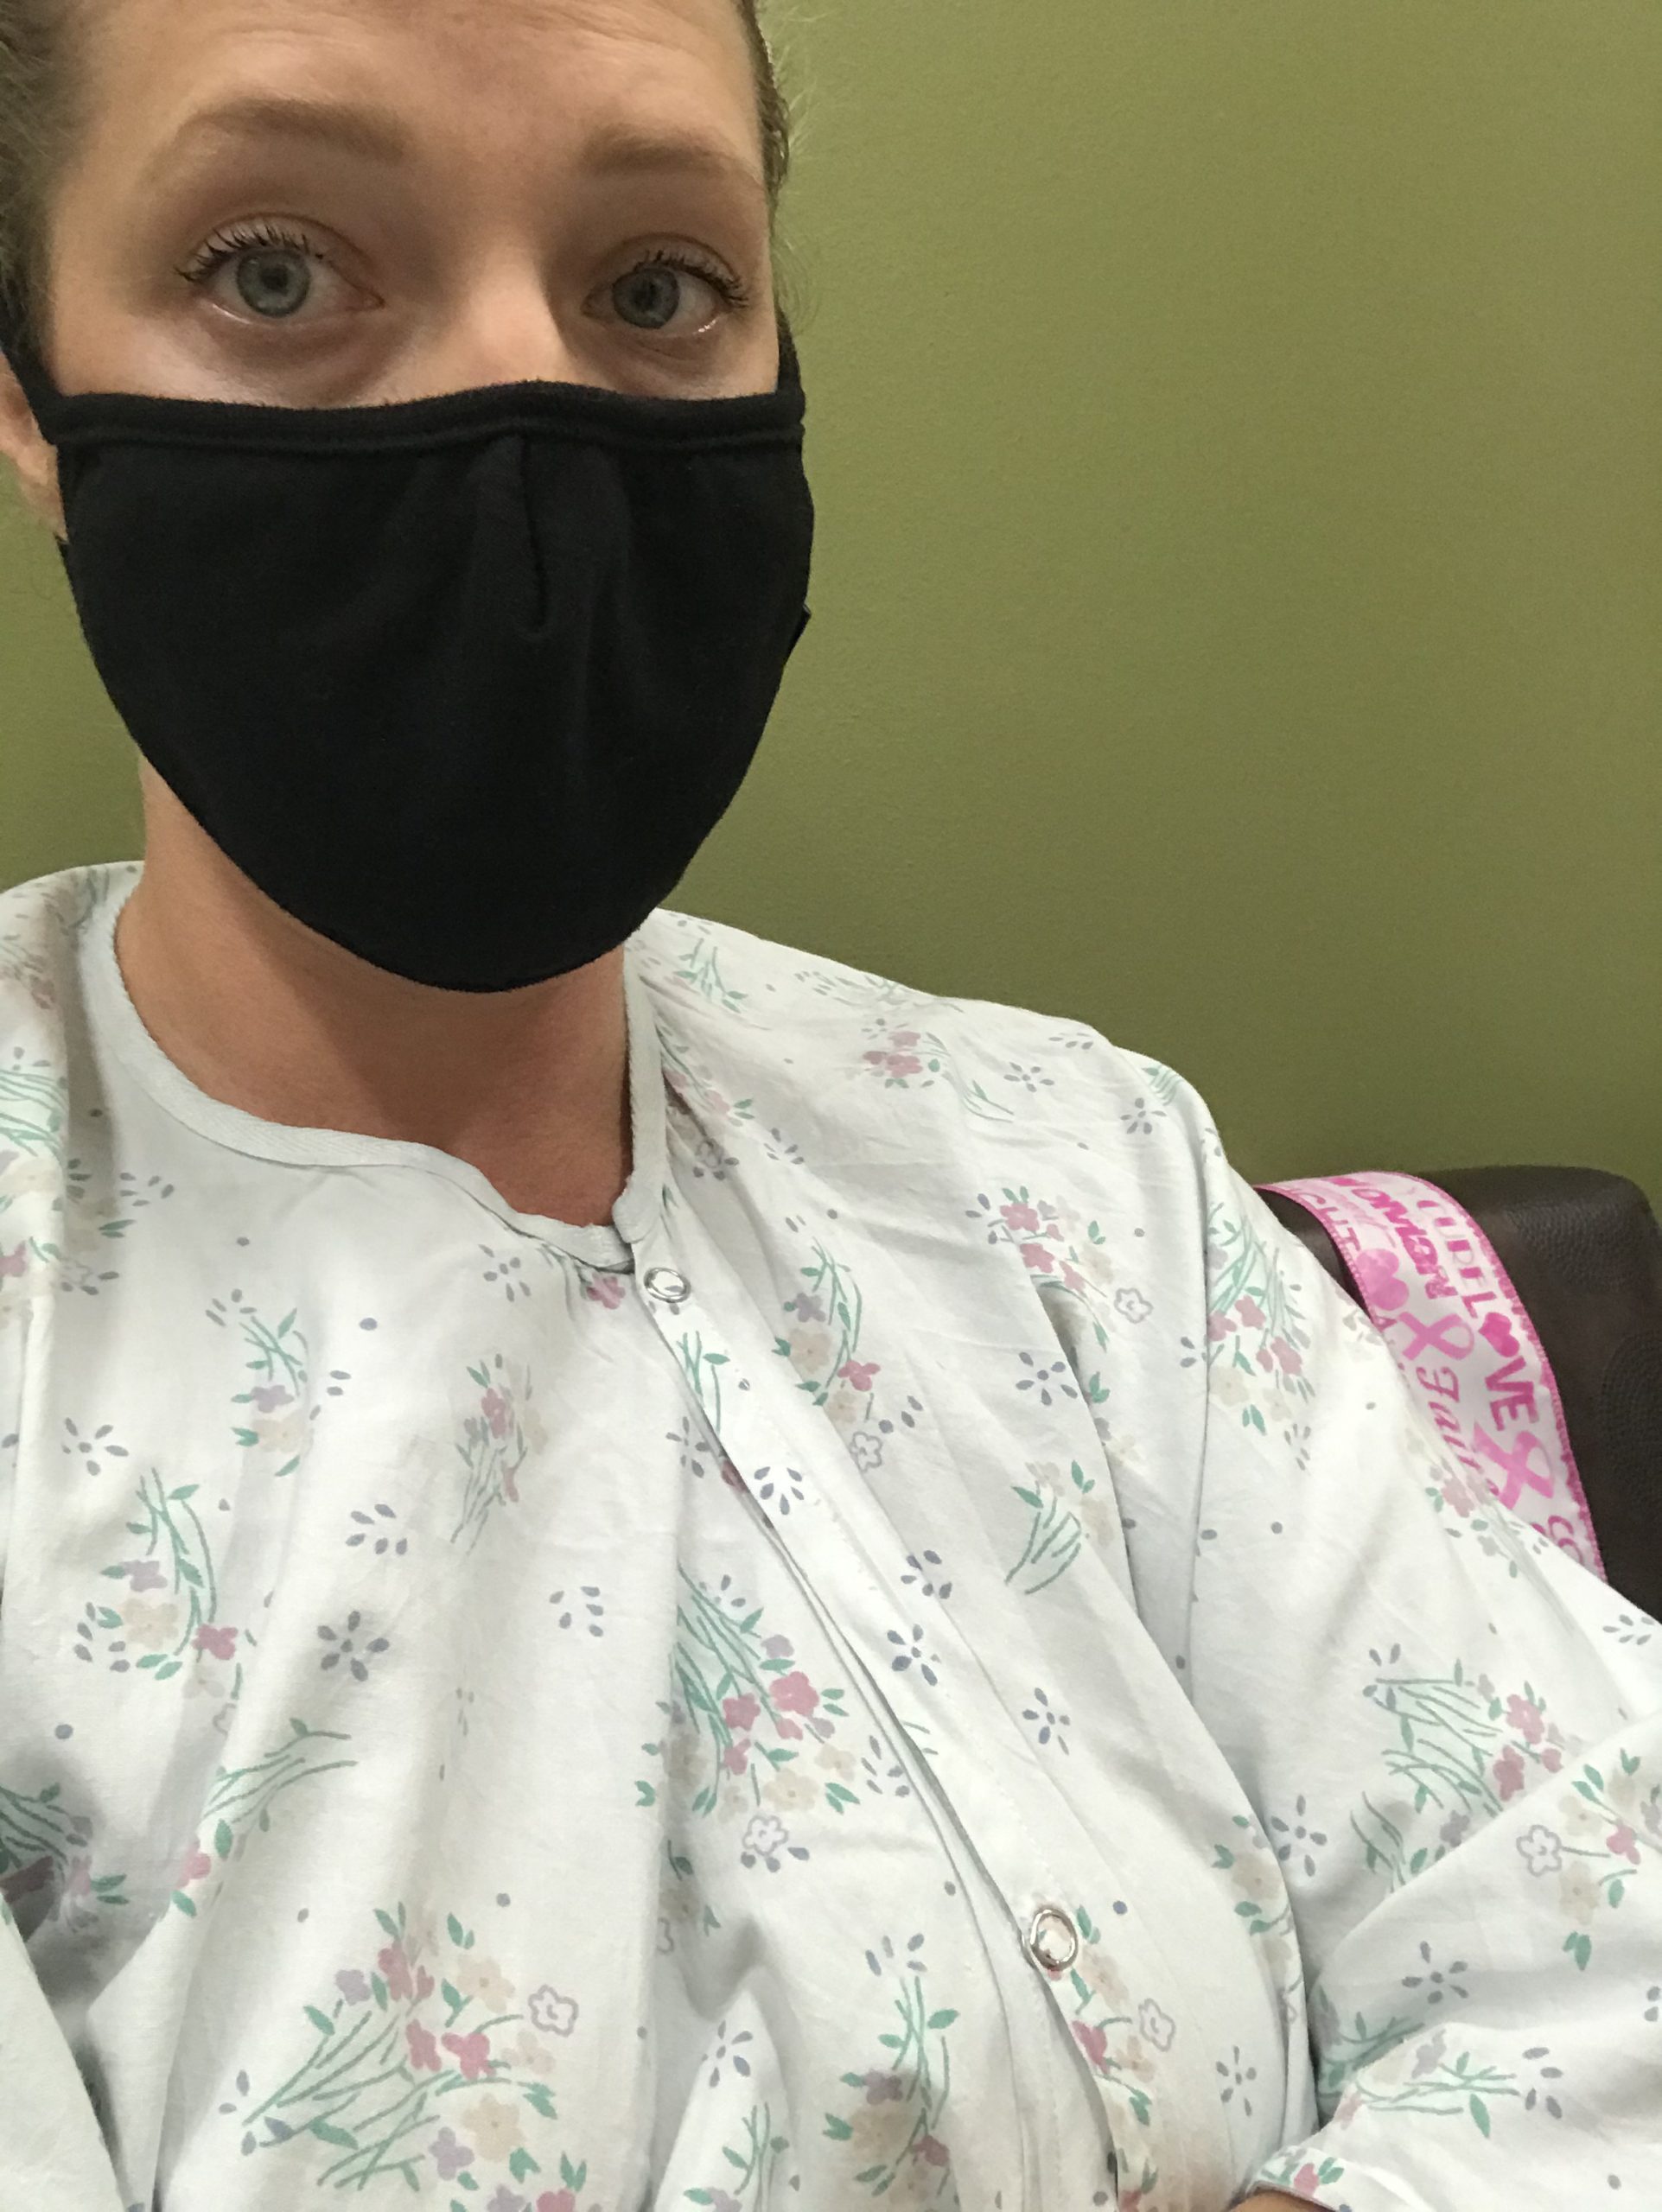 Samantha Persell with a mask and hospital gown for cancer treatment